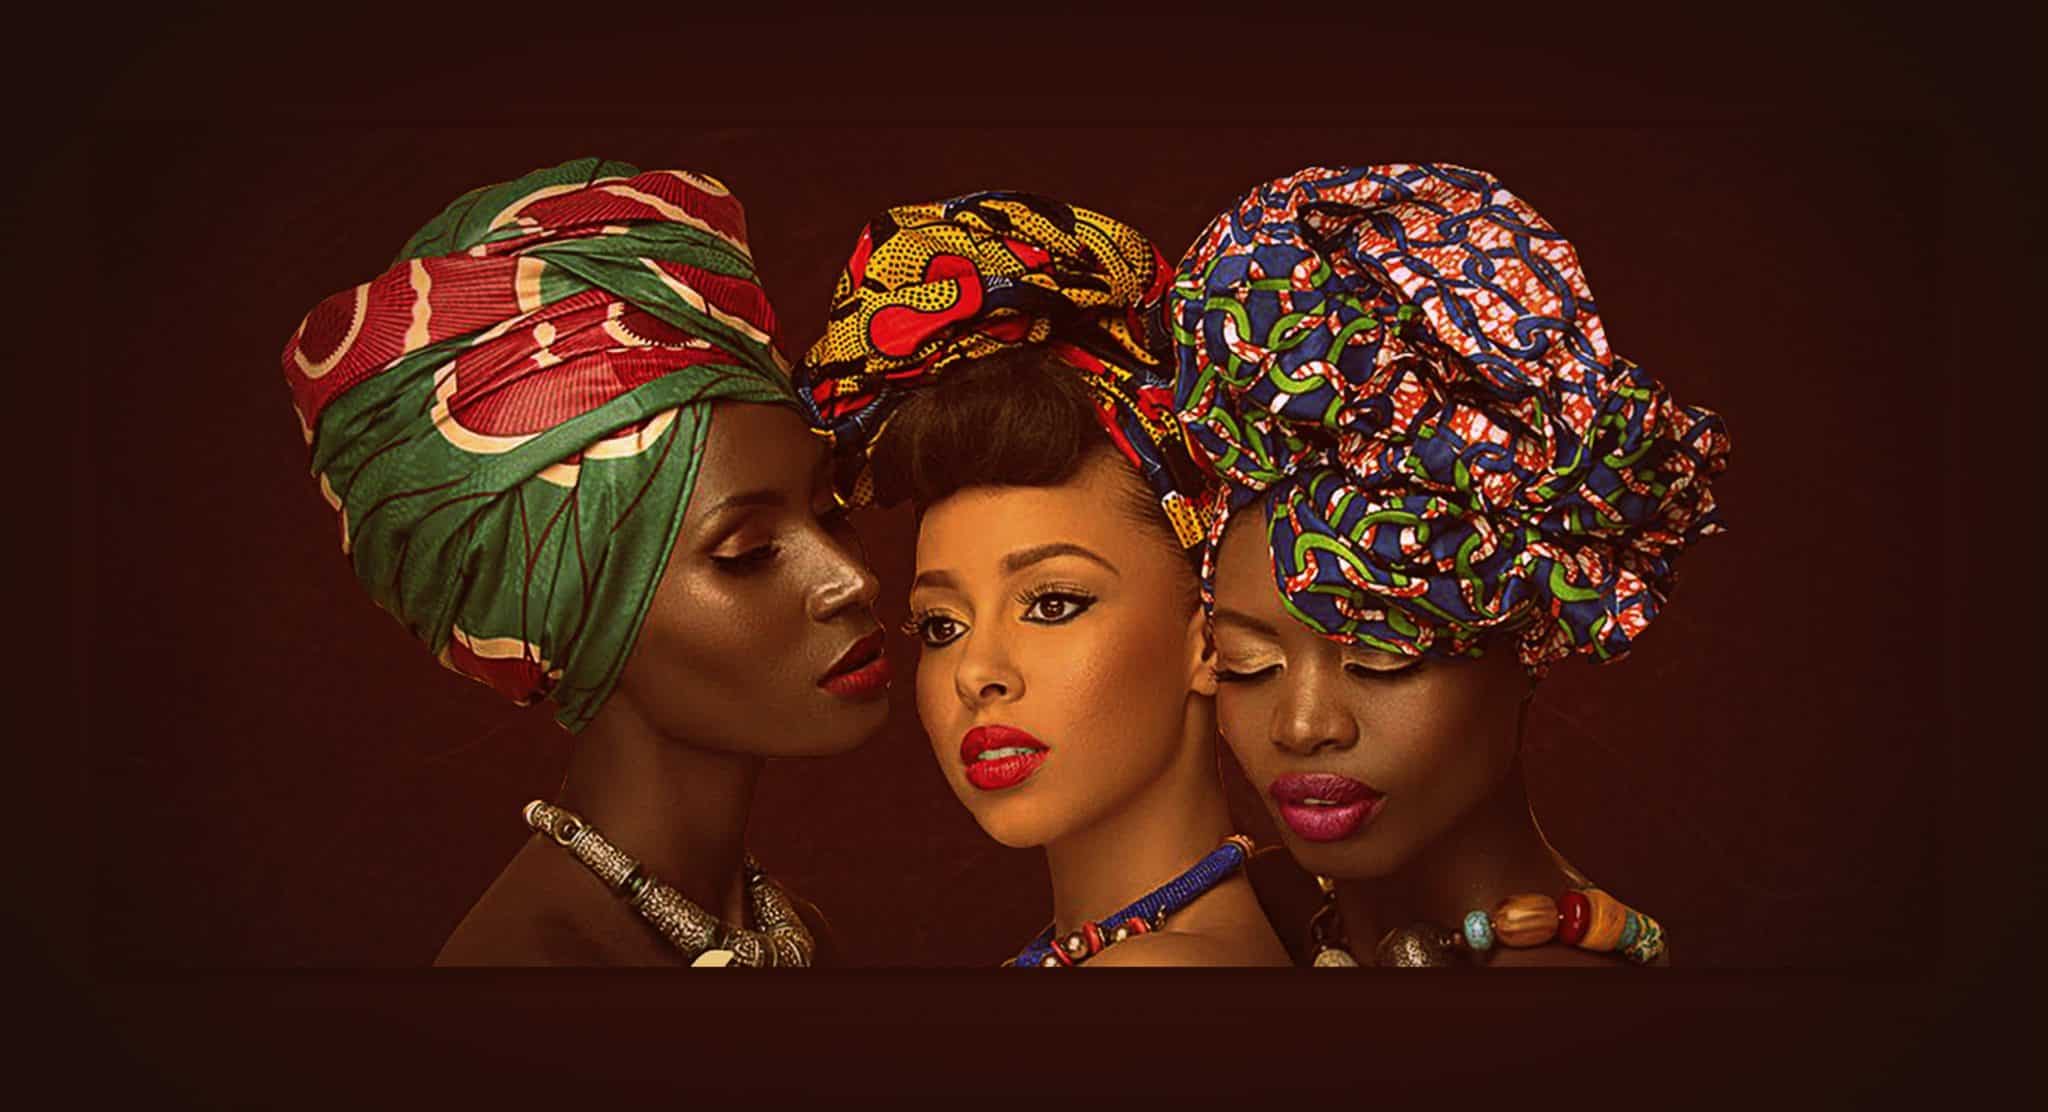 “Afro Girl” is your typical African woman inspired anthem, but a little bit more